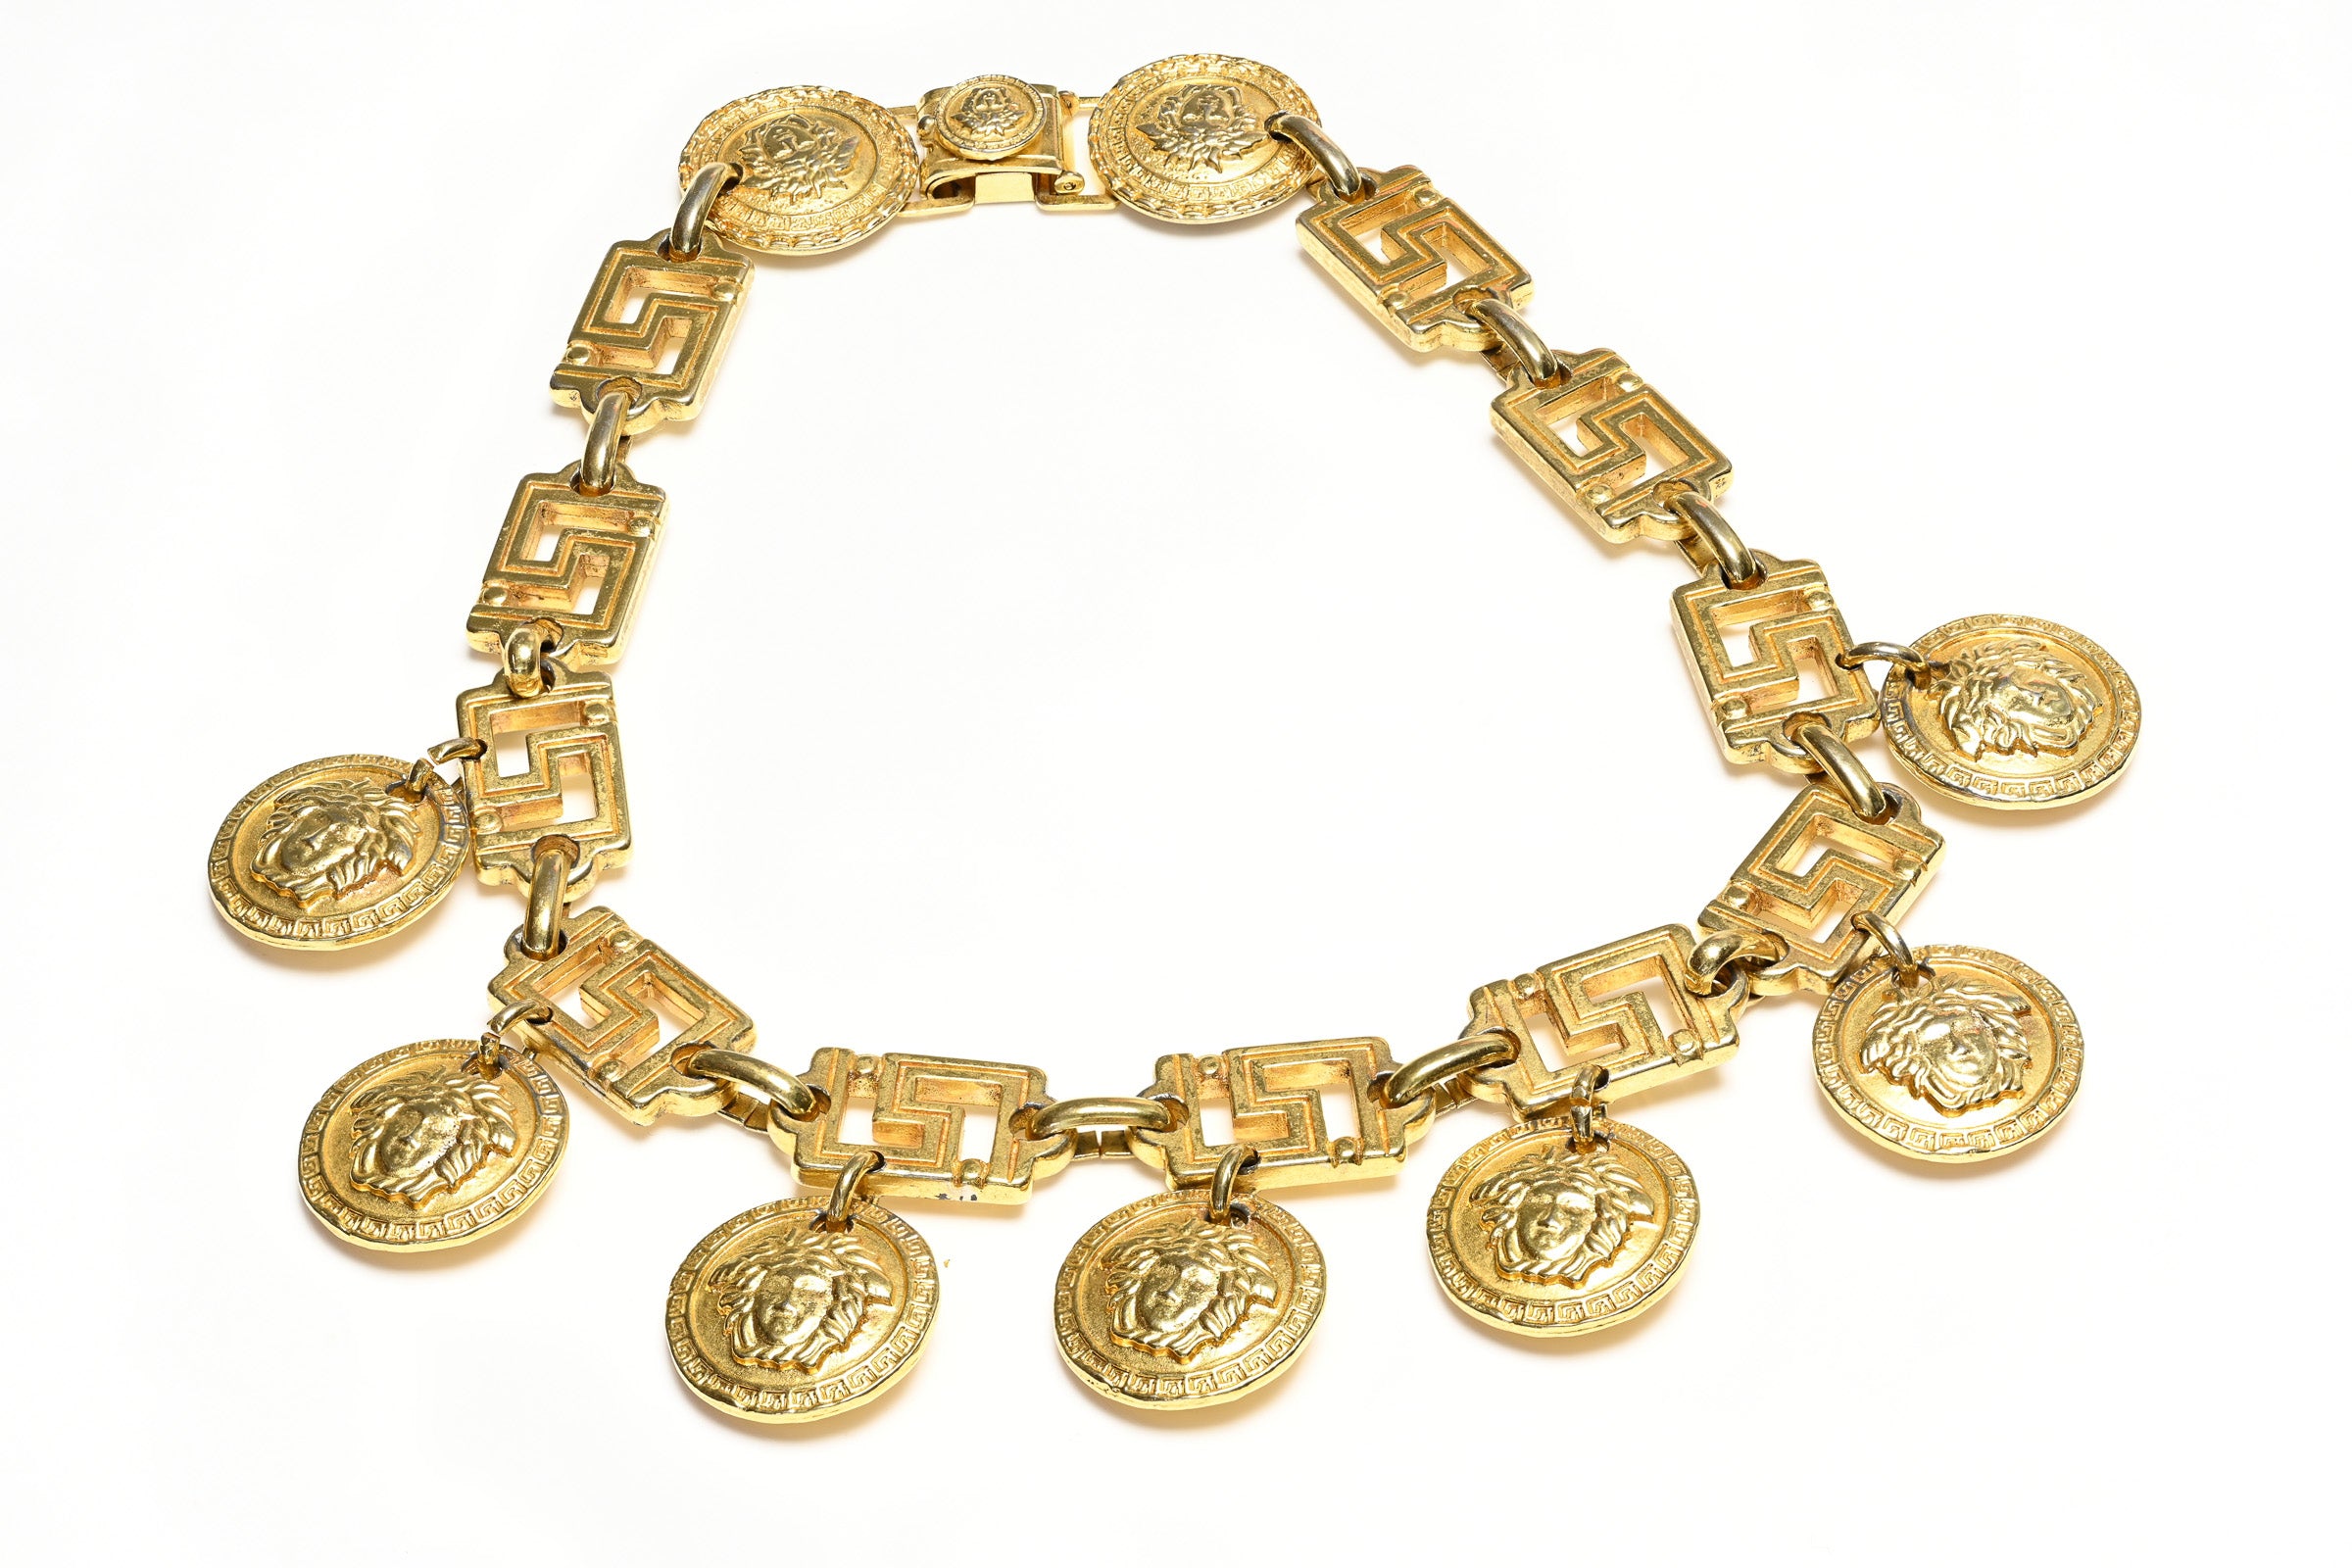 Vintage 1990's Gianni Versace Gold Plated Medusa Coin Necklace